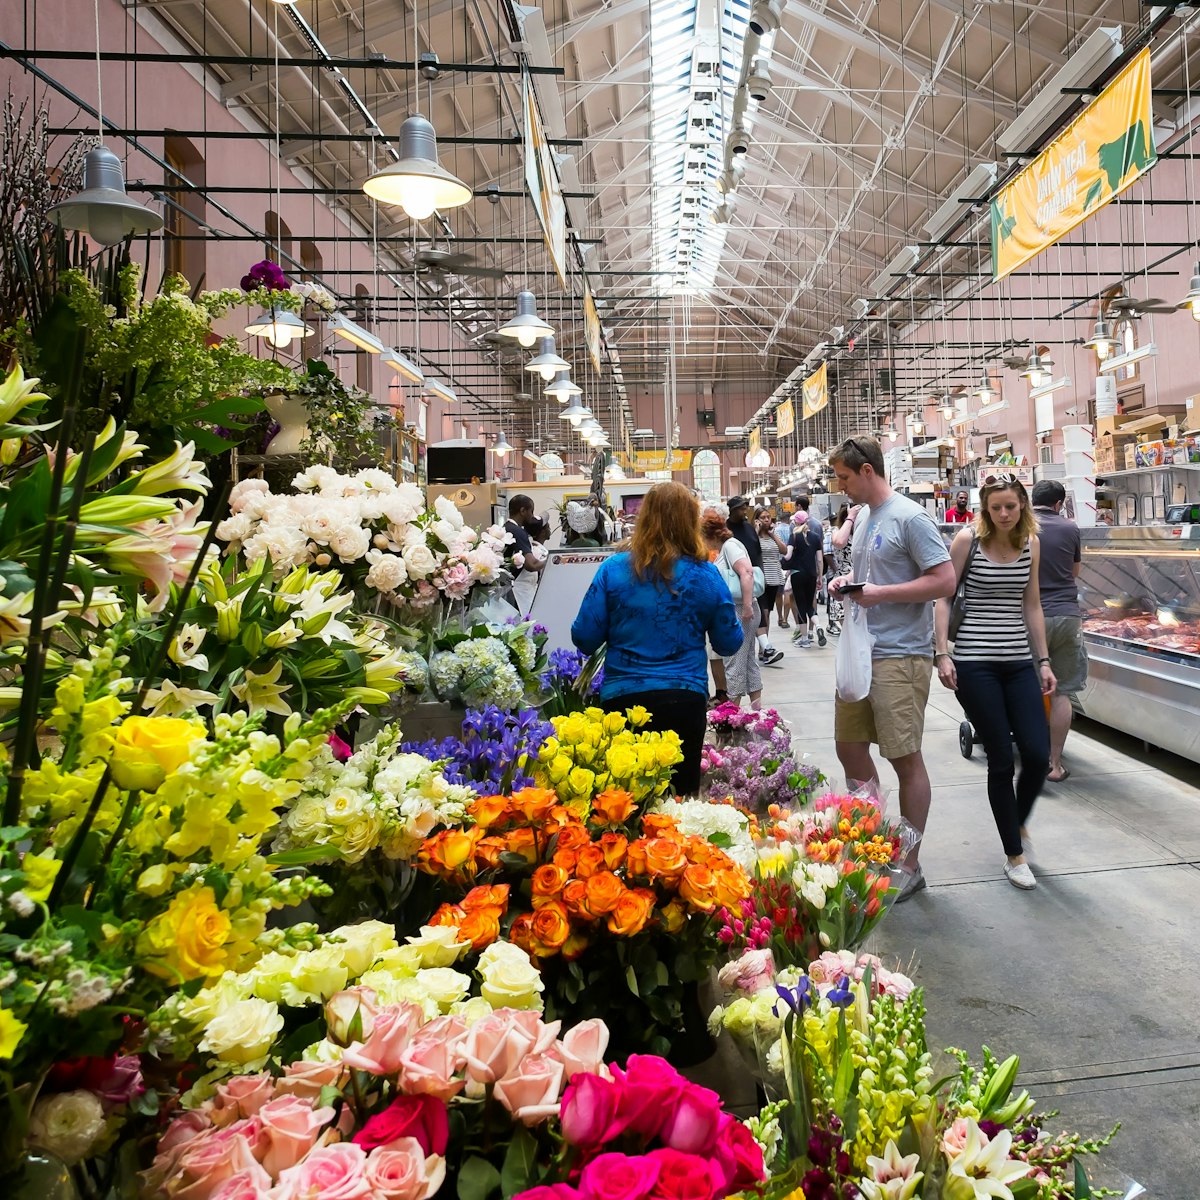 WASHINGTON DC-May 24, 2015: Inside the historic Eastern Market in the Capitol Hill neighborhood, first opened in 1805. Image of shoppers browsing. Colourful flower stand in the foreground.
aisle, america, american, architecture, attraction, building, buyers, capitol, columbia, dc, destination, district, eastern, exterior, farmers, flowers, food, historic, inside, interior, landmark, market, marketing, marketplace, men, neighborhood, old, people, public, residents, sellers, shopper, shopping, stalls, states, structure, tourism, tourist, united, us, usa, vintage, visitors, walking, washington, weekend, women